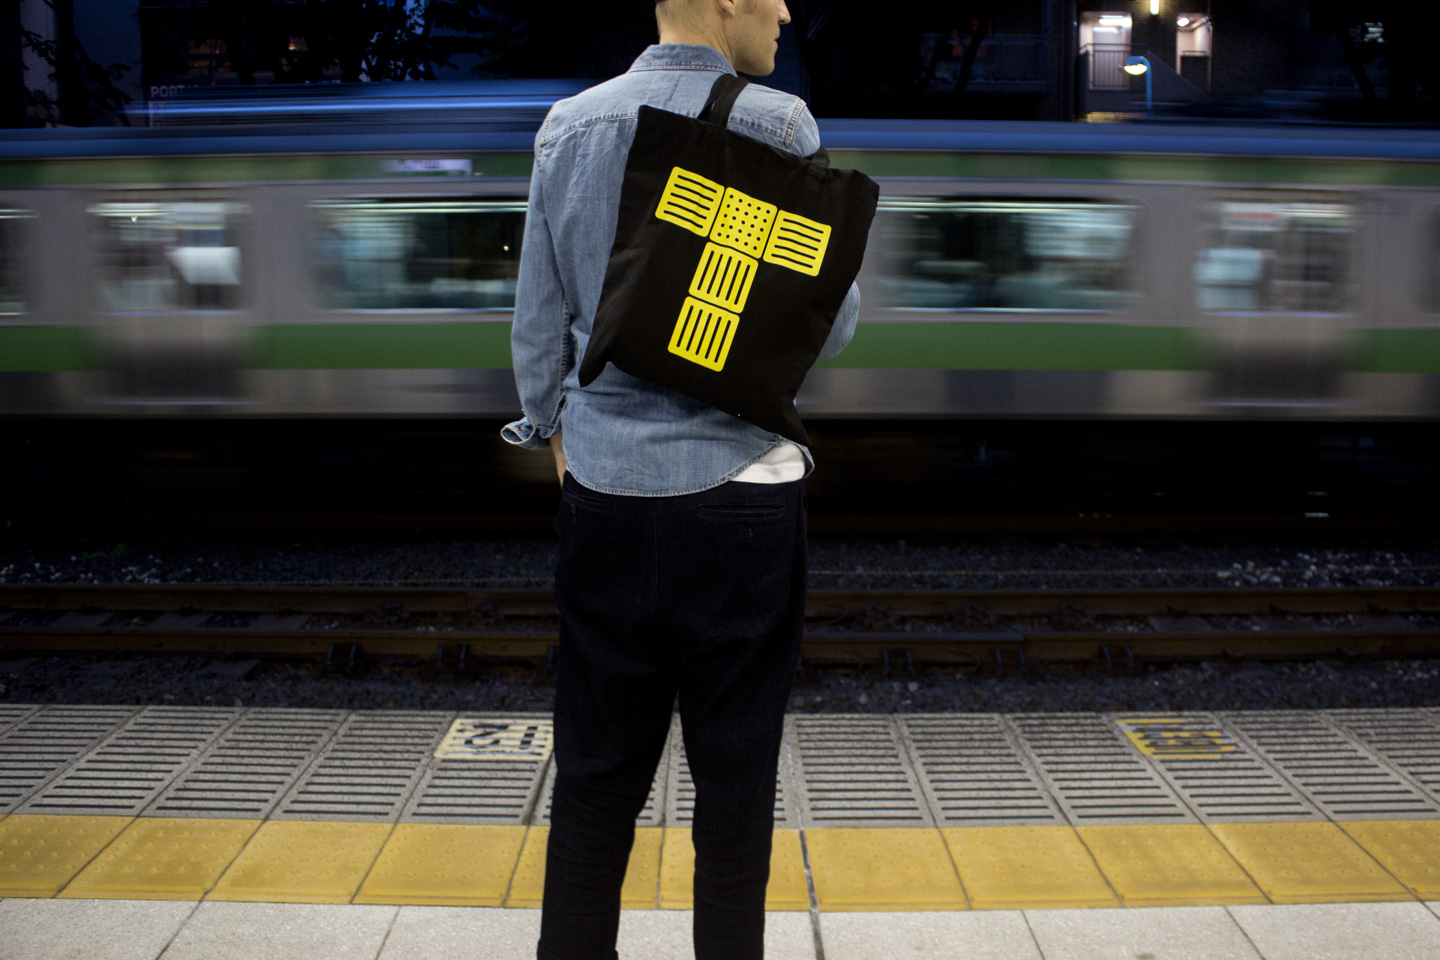 Tokyo Signs™ - Products inspired by the streets of Tokyo - Tactile Paving Tote Bag